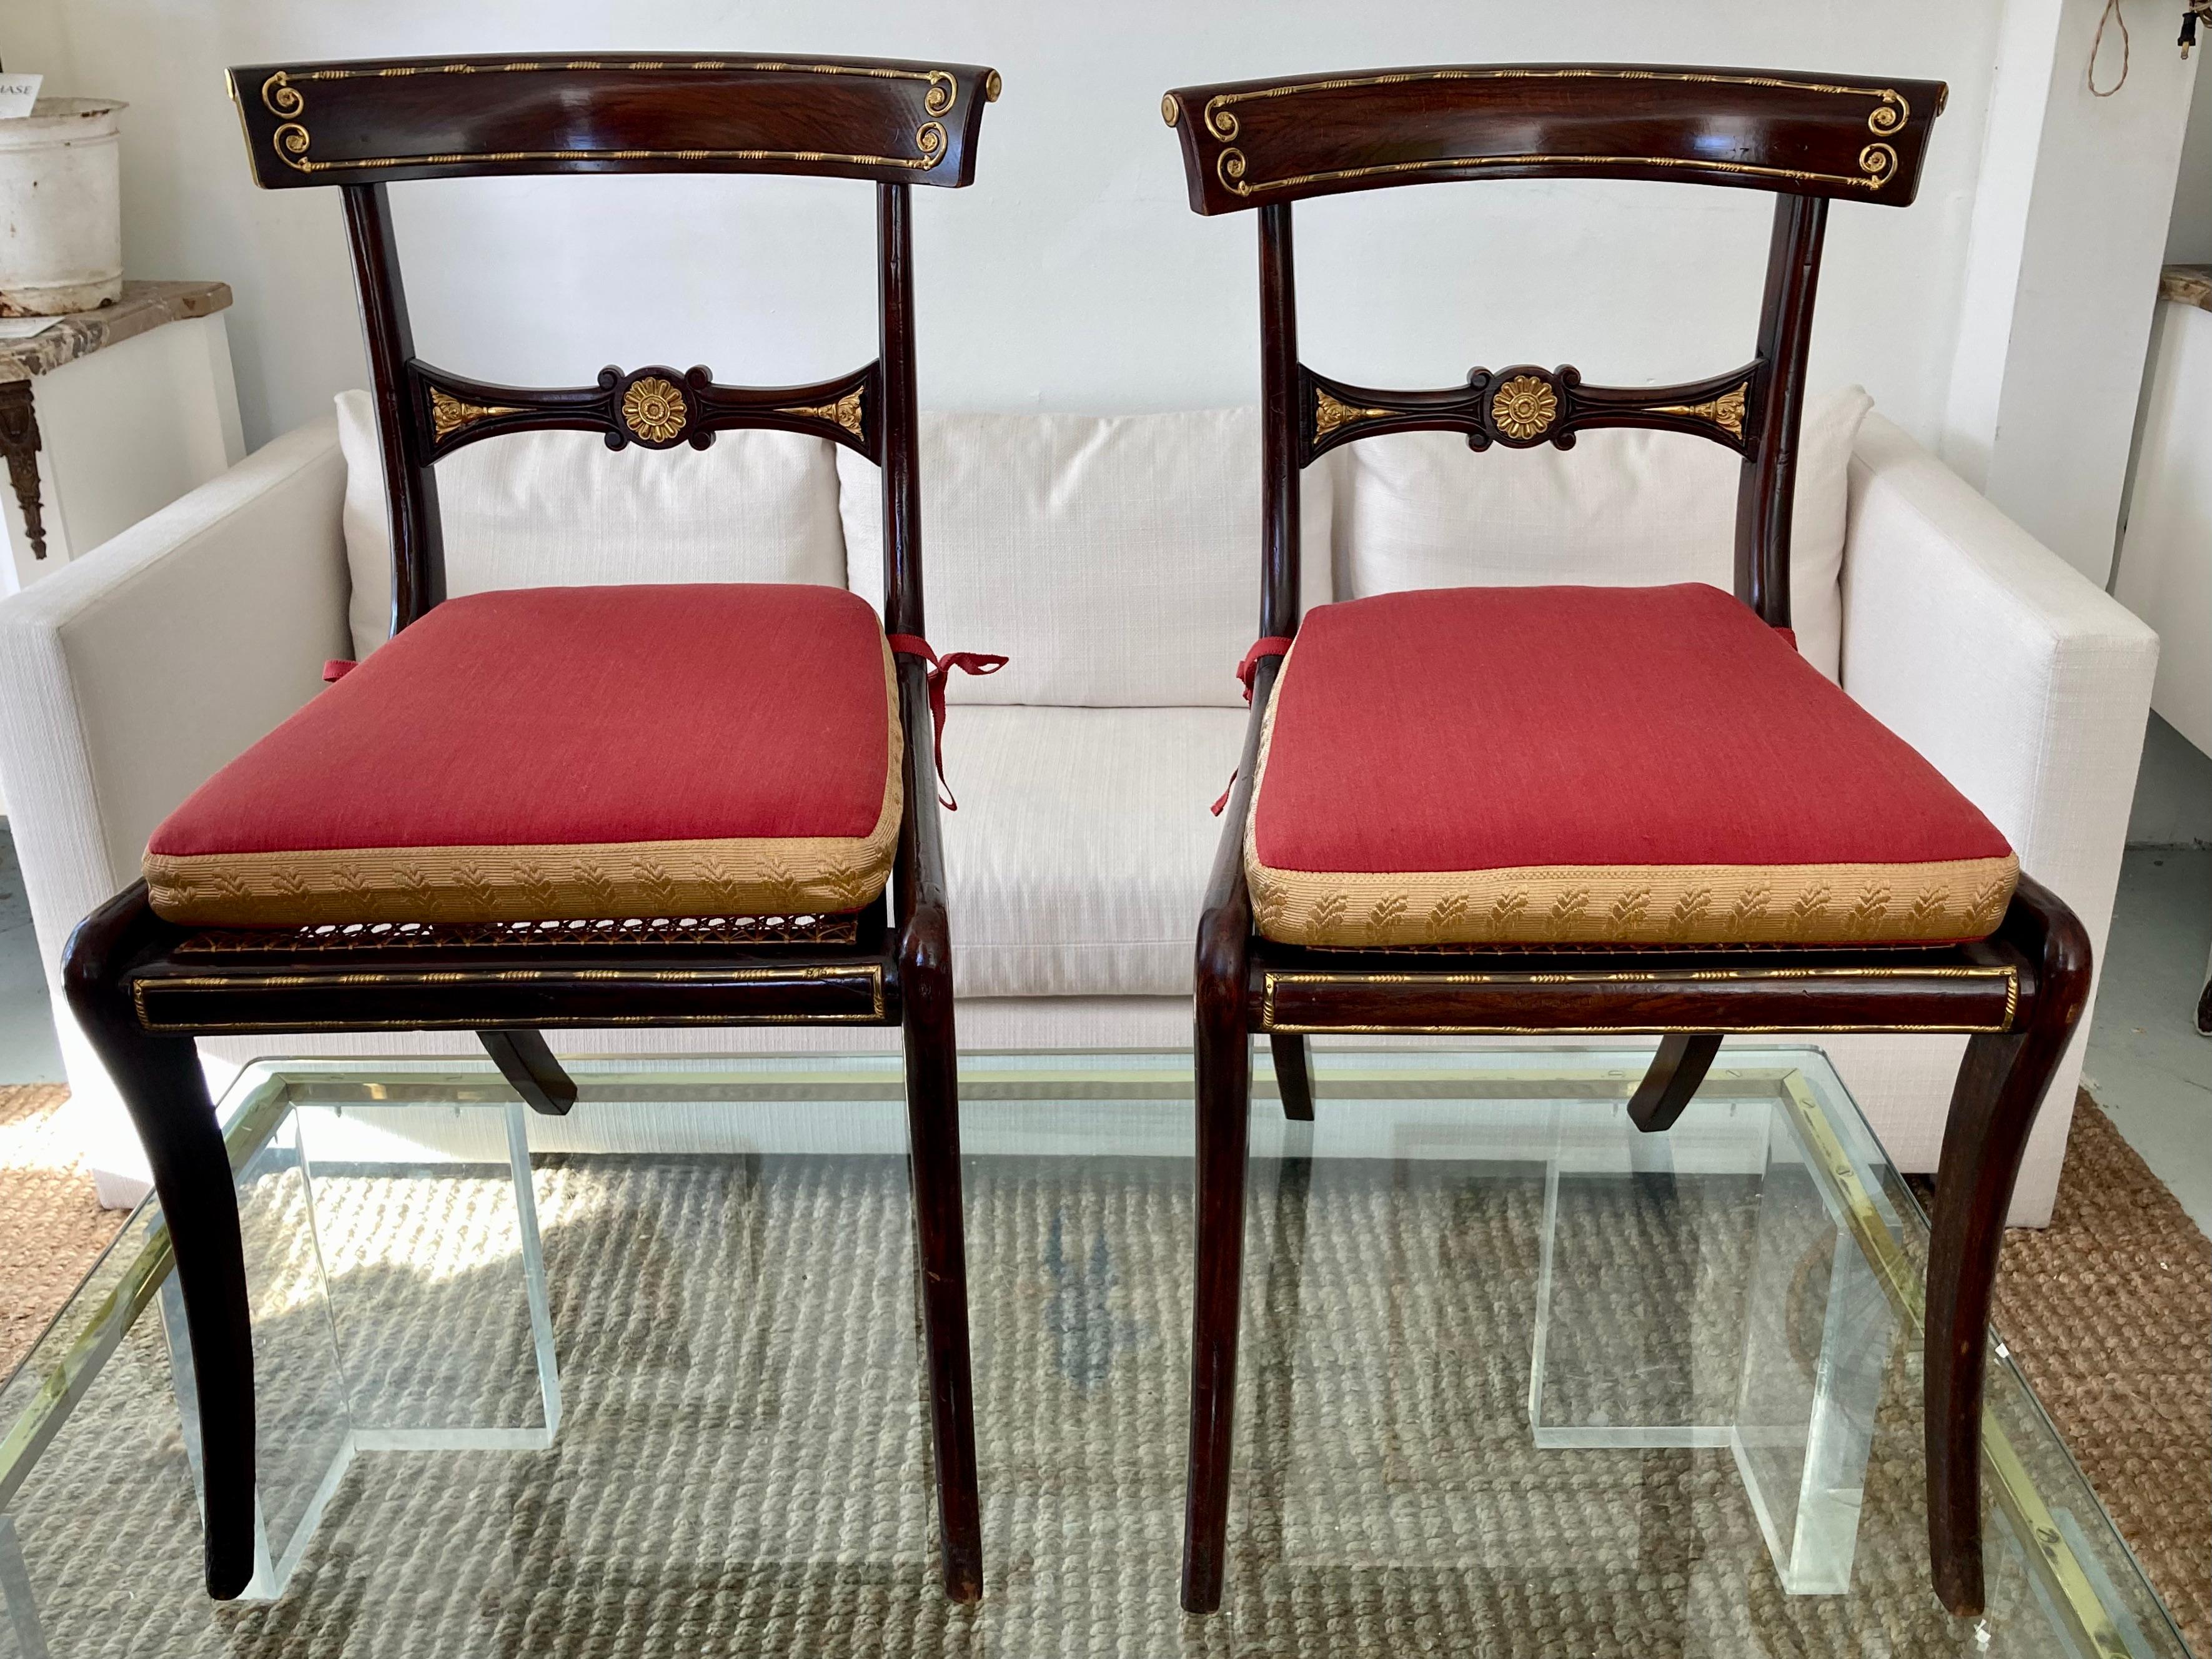 English 19th C Ormolu Inset Regency Chairs With Red Cushions and Gold Metal, Set of 8 For Sale